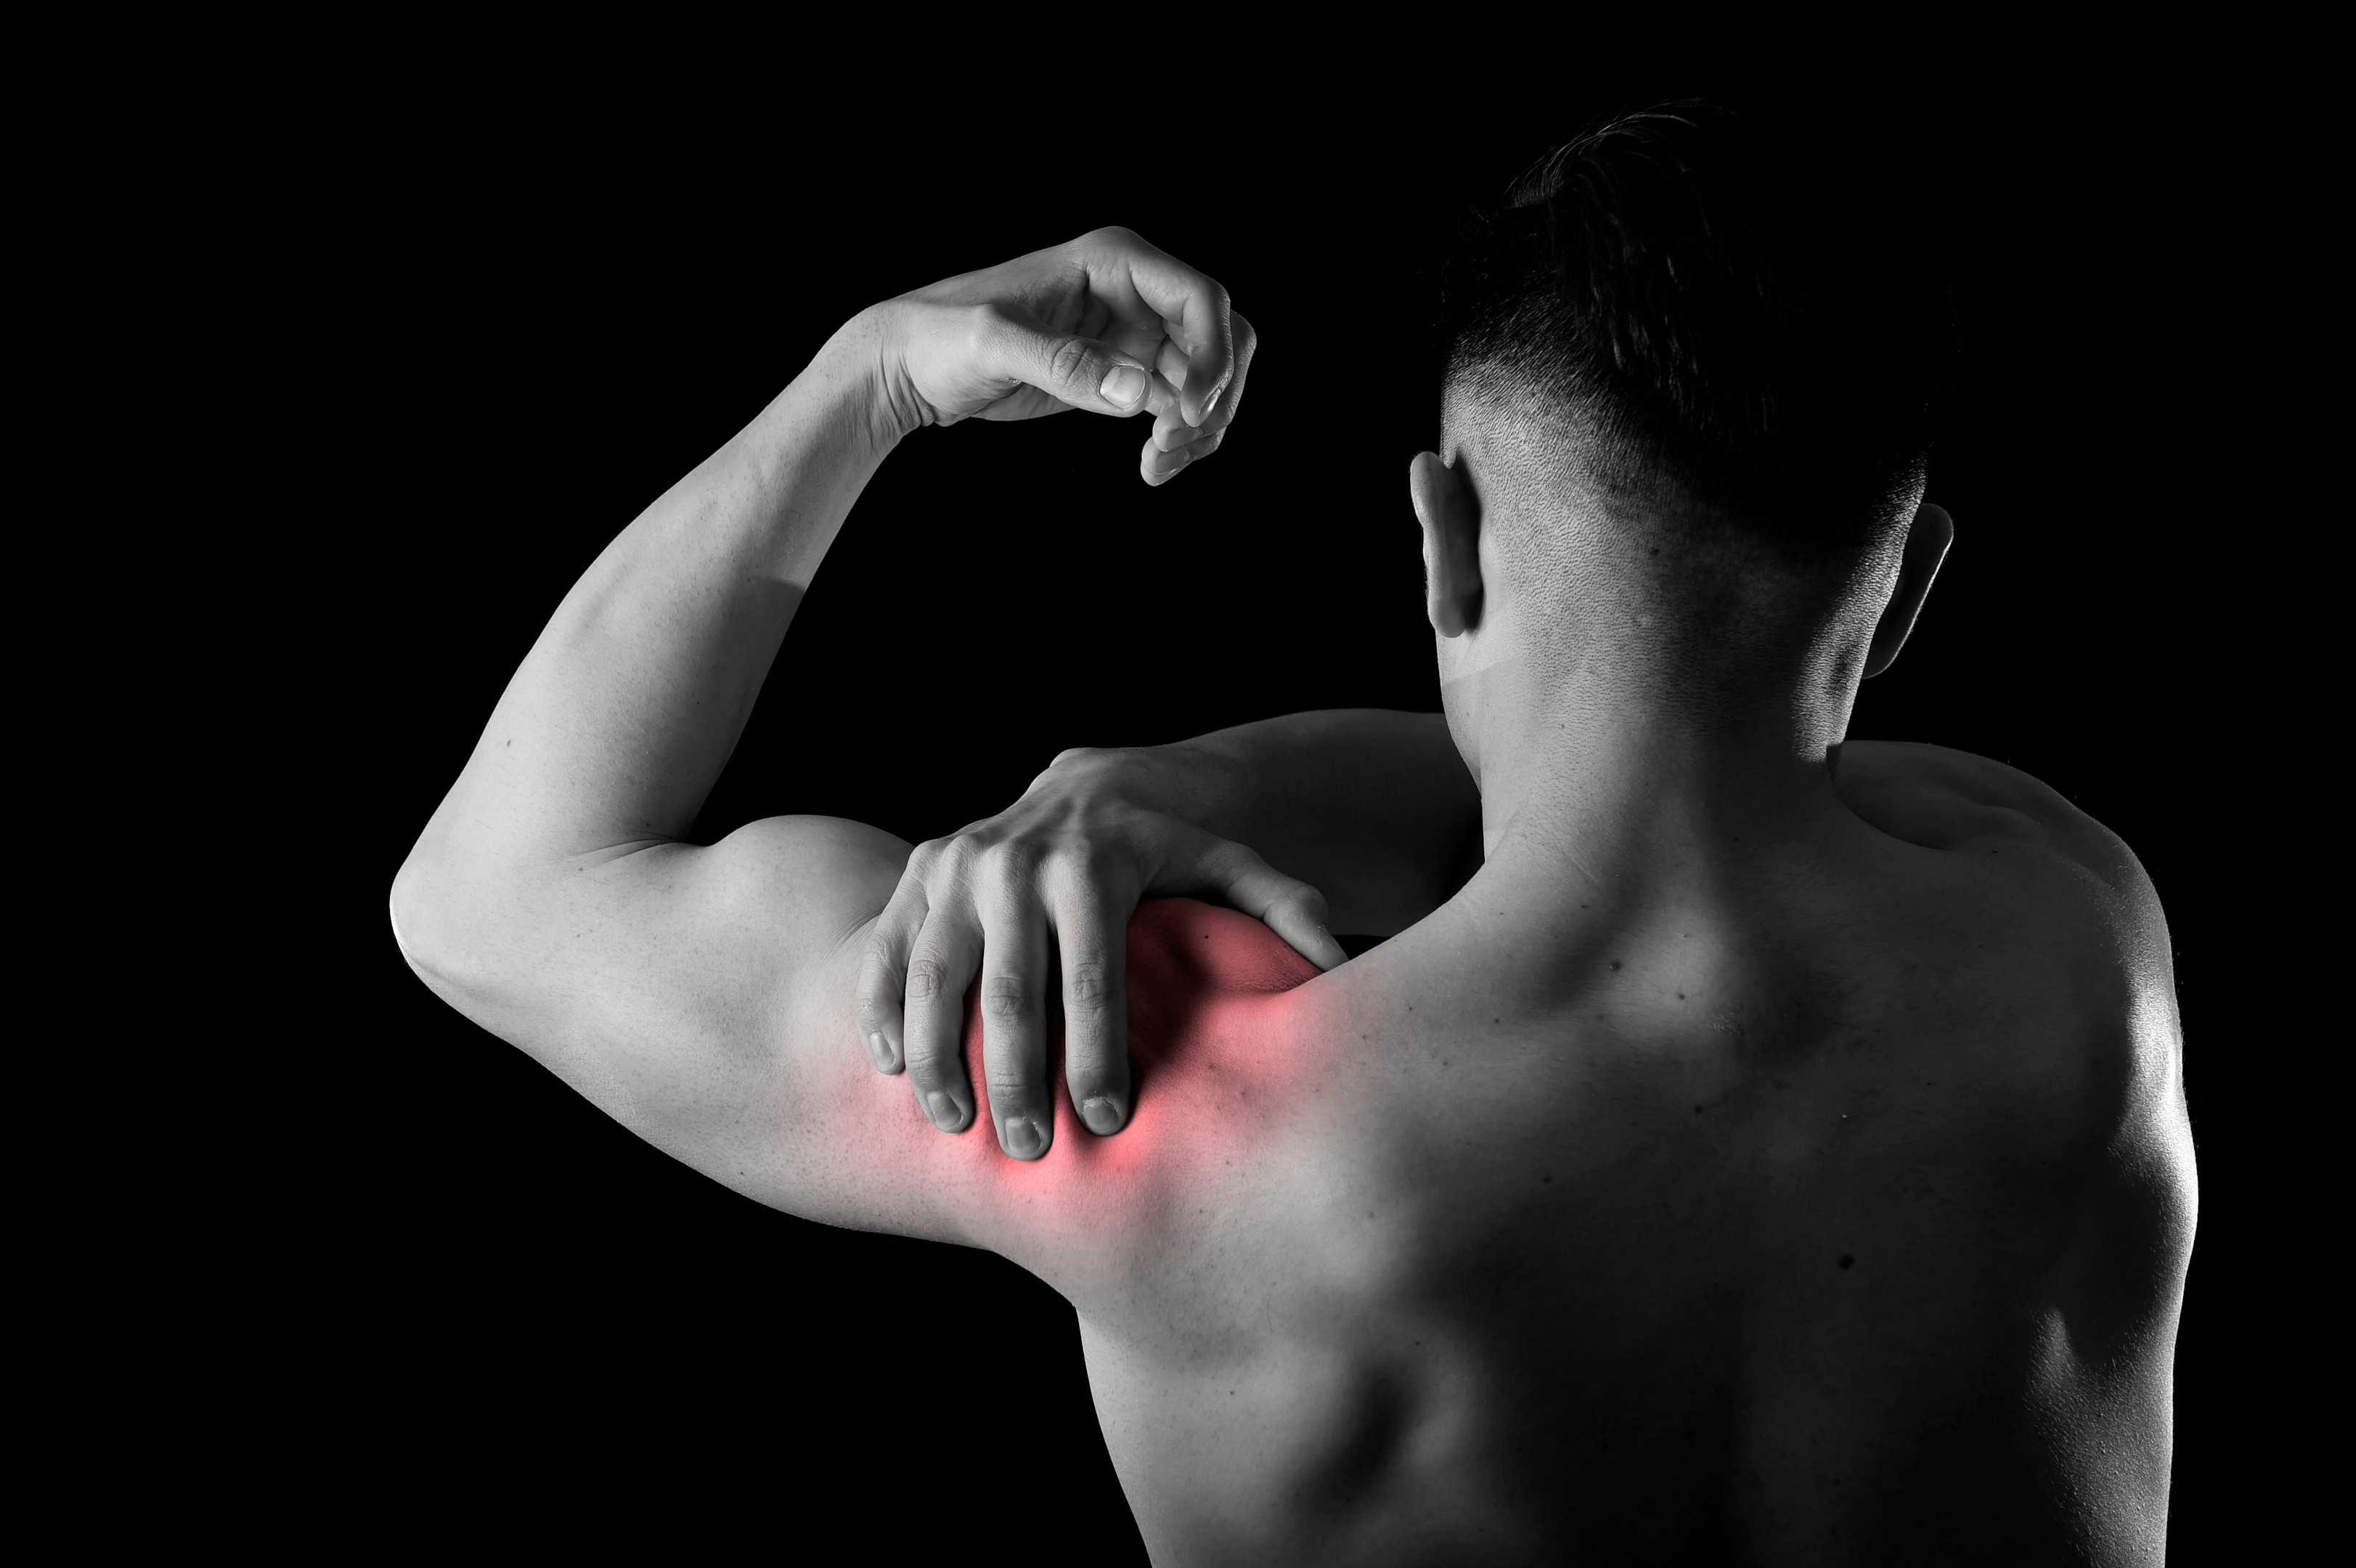 Some will talk about muscle pain and inflammation. Although we cannot claim our products reduce inflammation or are anti-inflammatory, but there may be a link between the same receptors an over-the-counter supplement may target for pain as our THC products might target.